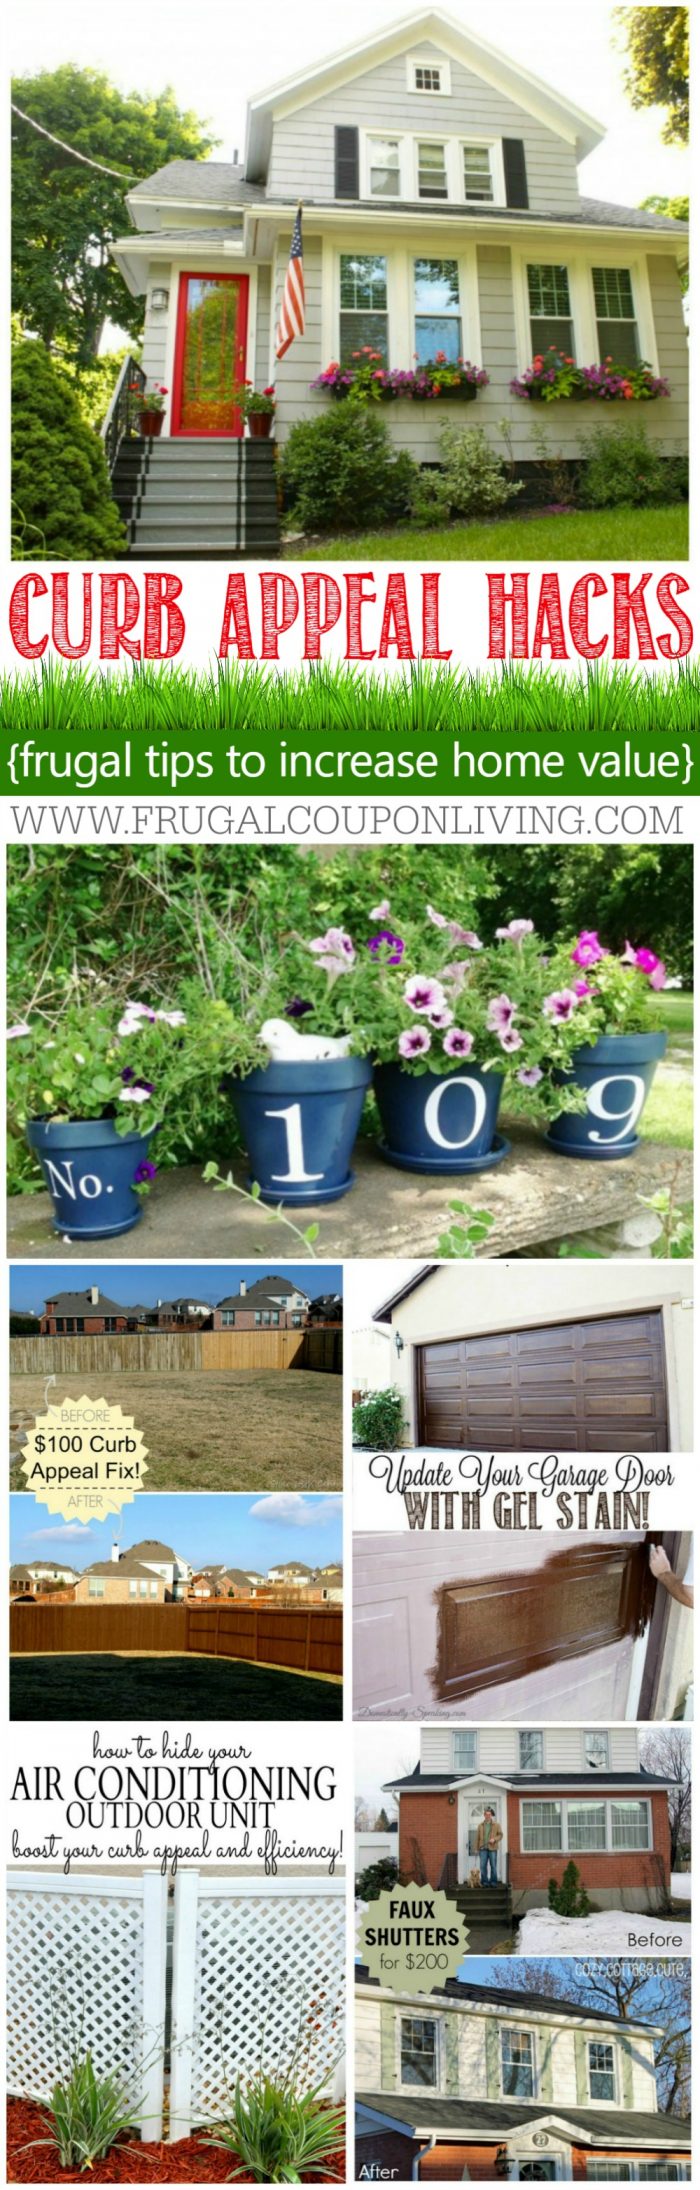 curb-appeal-hacks-frugal-coupon-living-Collage